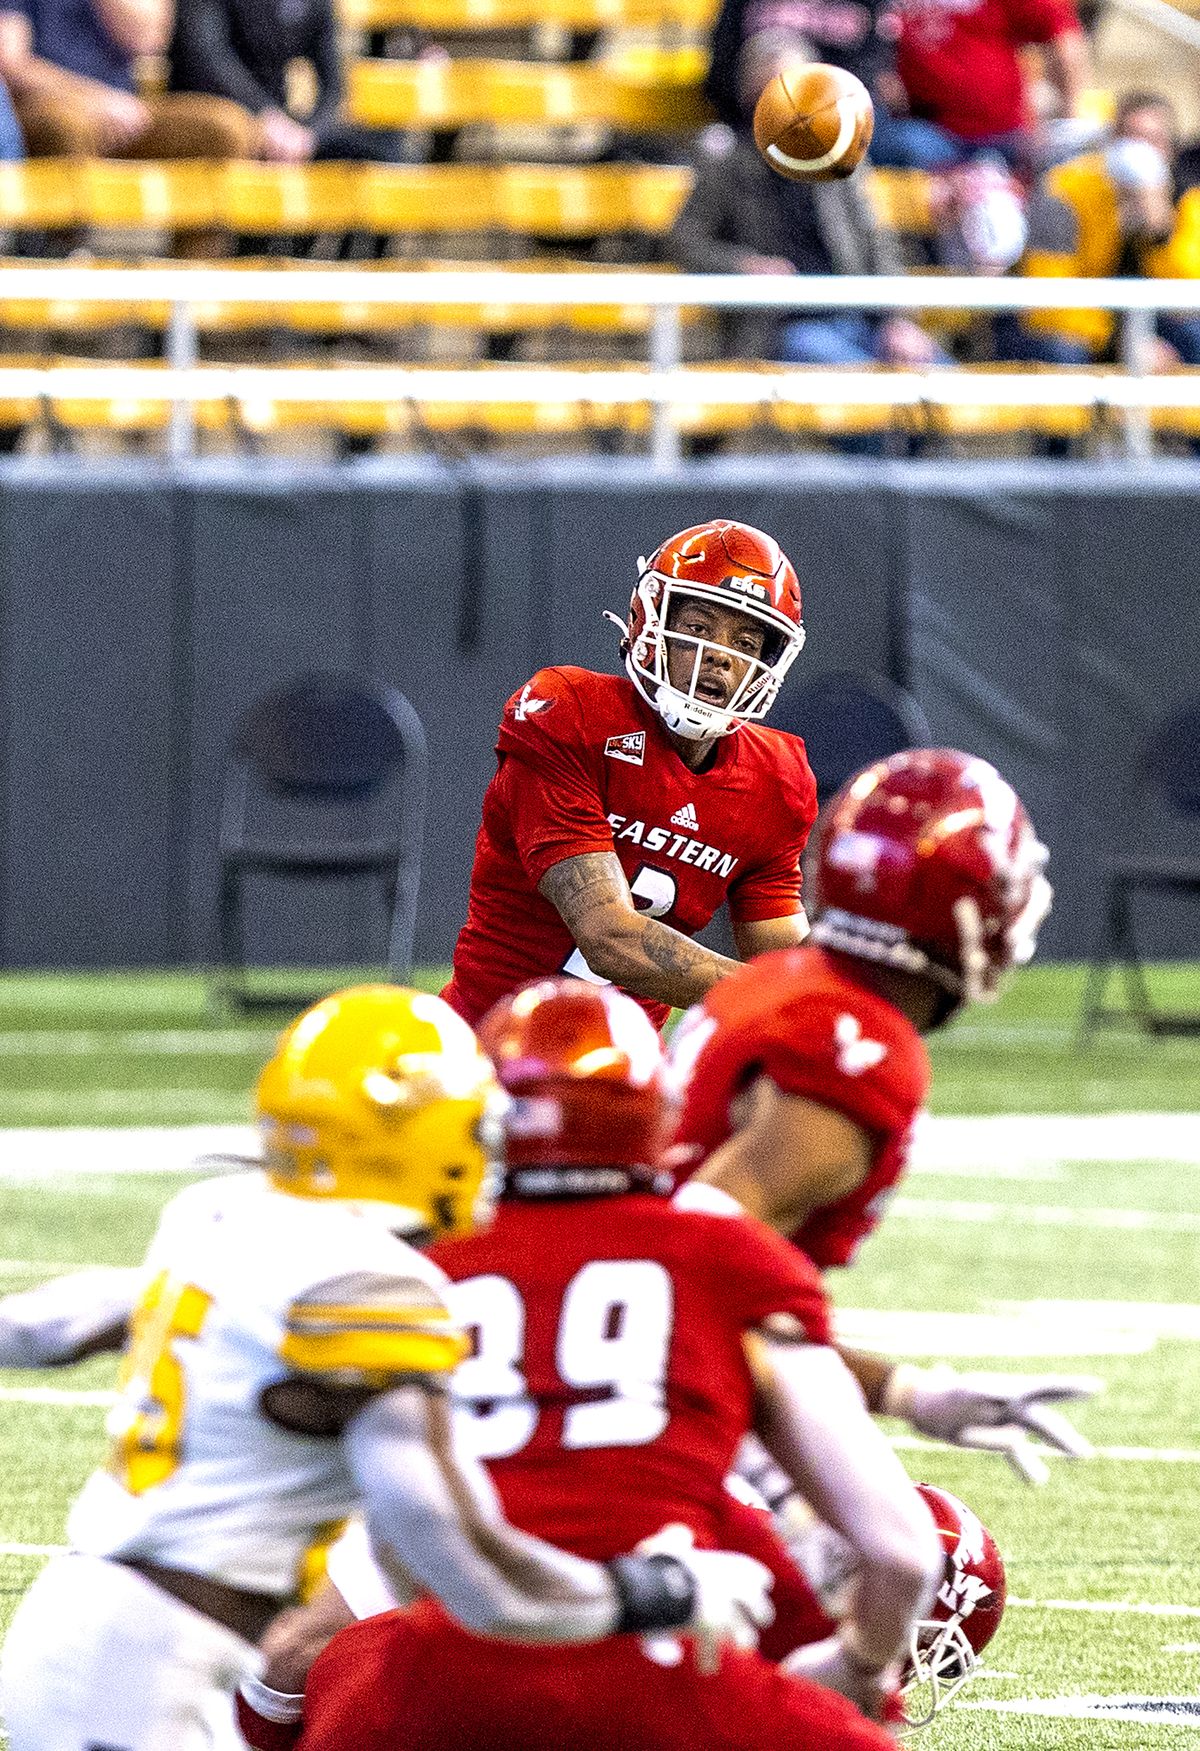 Eastern Washington quarterback Eric Barriere (3) throws a pass during the first quarter against Idaho on Saturday in Moscow, Idaho. (August Frank)